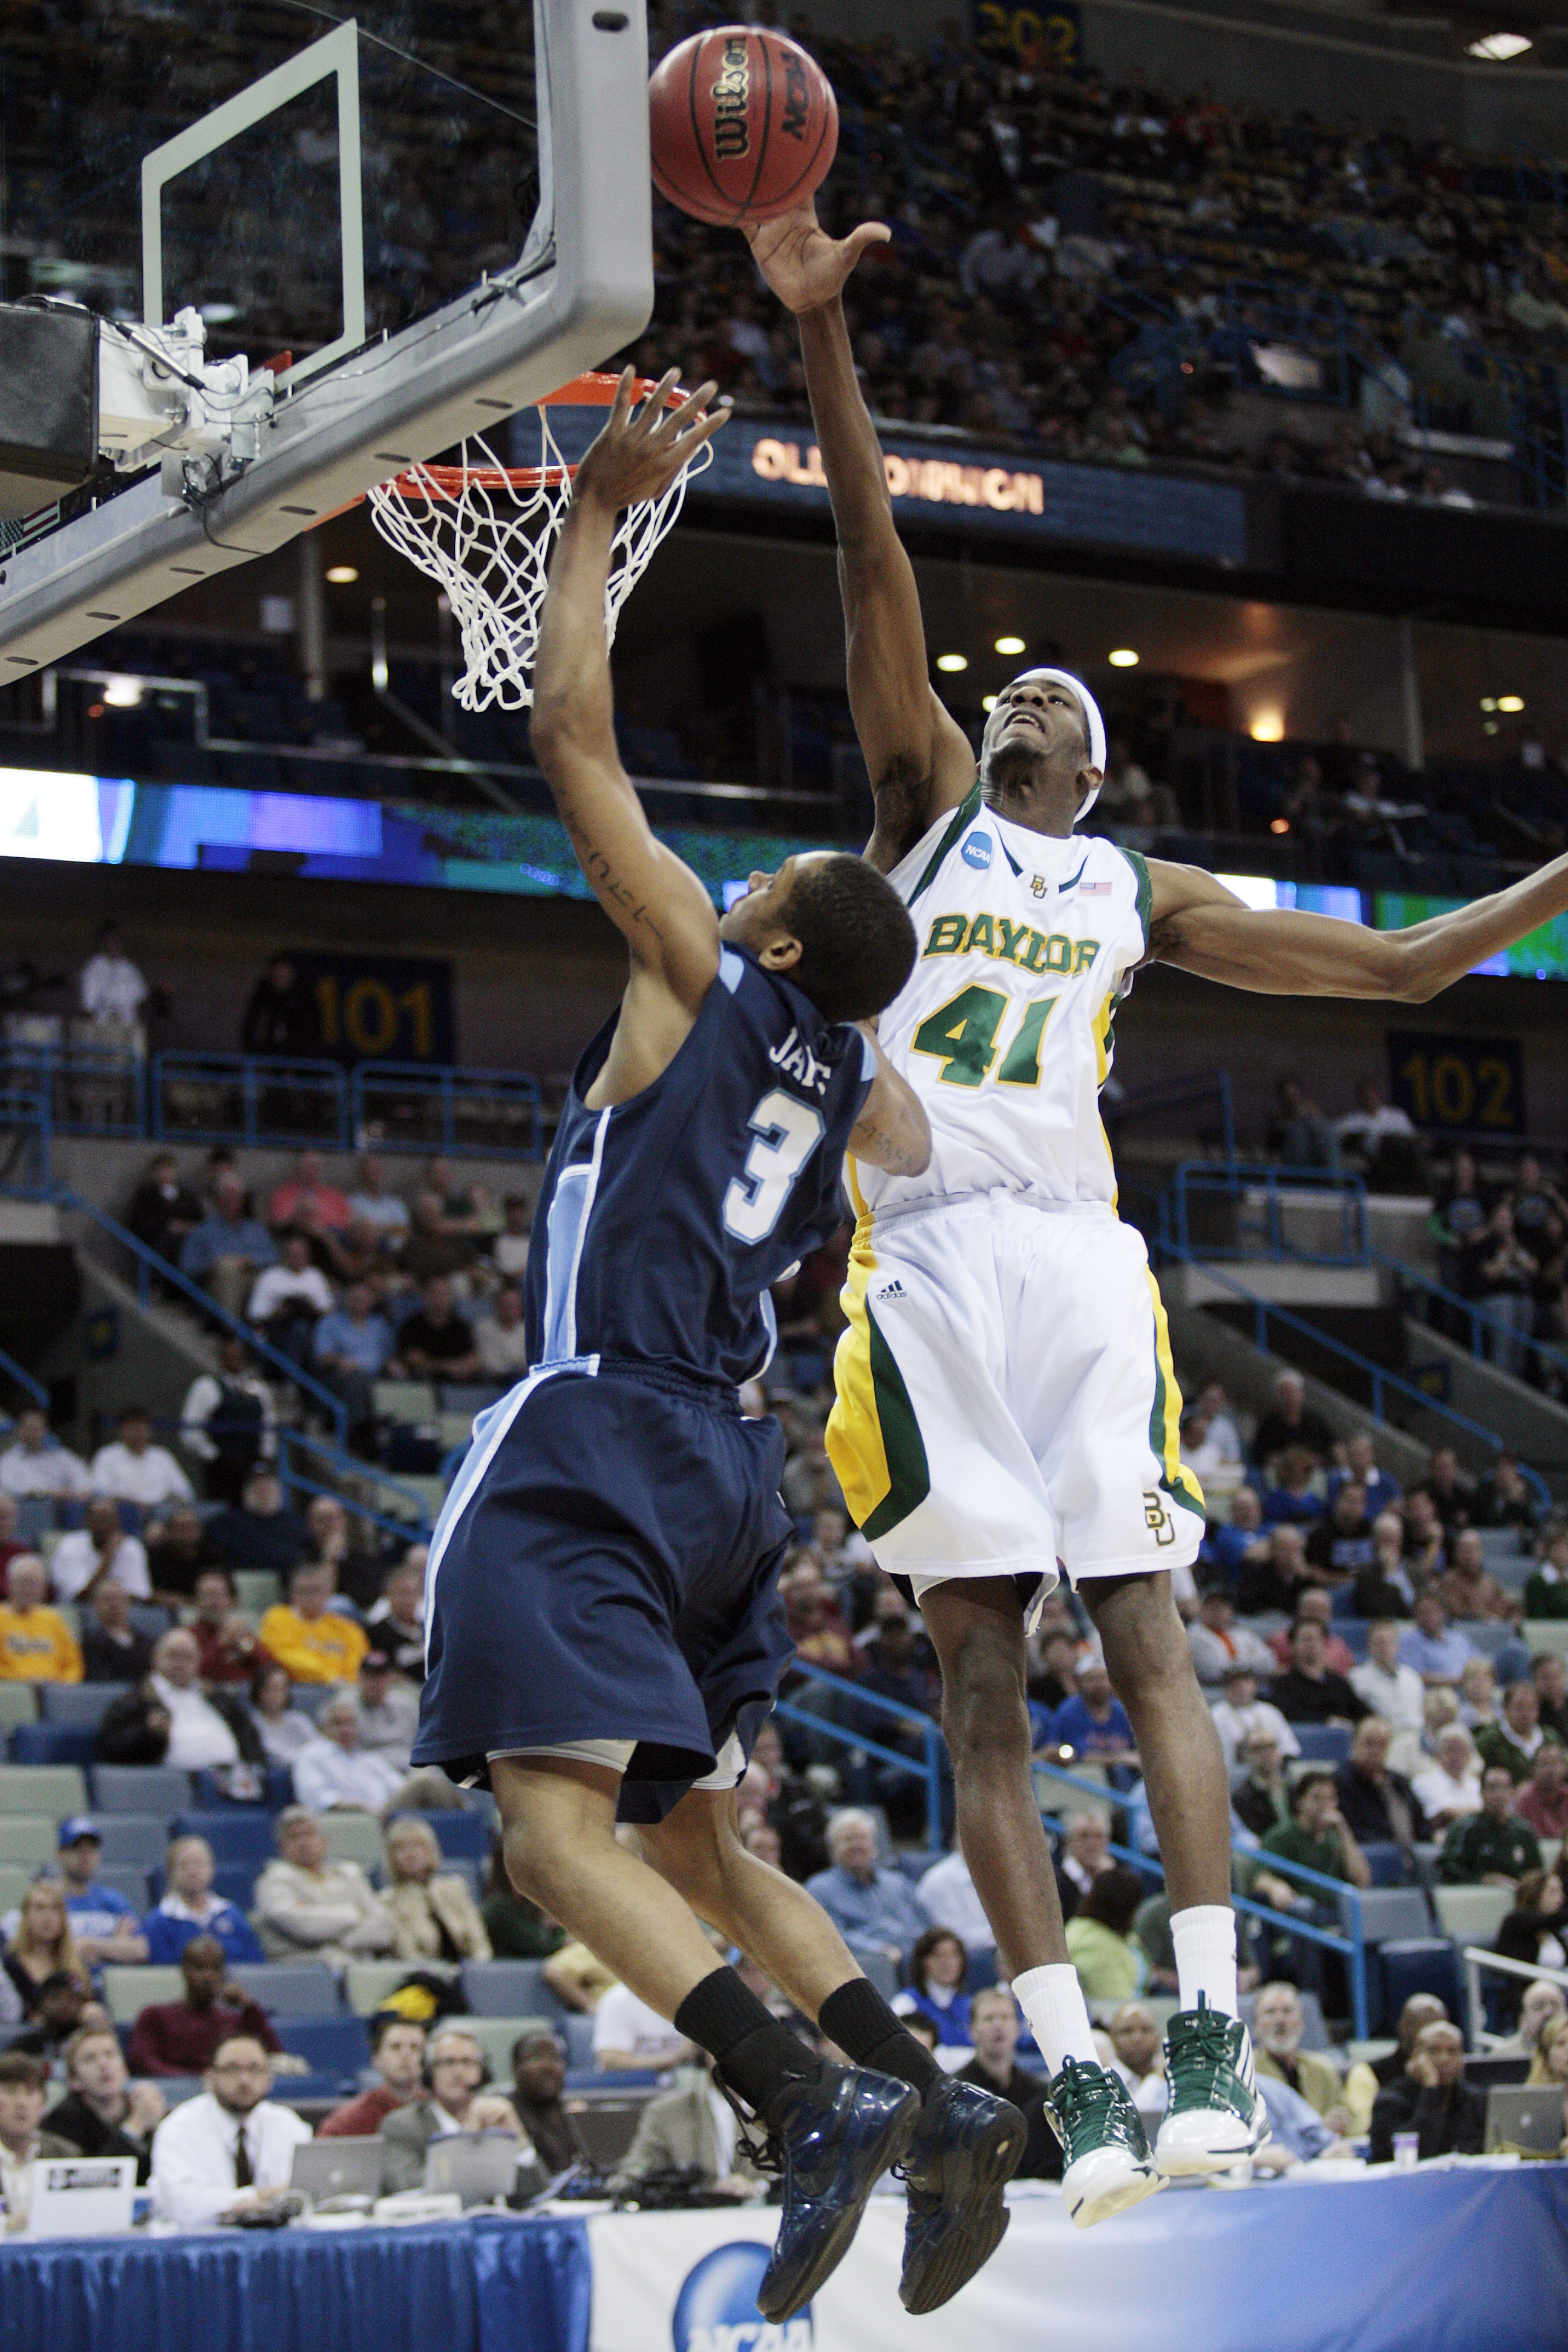 NEW ORLEANS - MARCH 20:  Anthony Jones #41of the Baylor Bears blocks the shot of Darius James #3 of the Old Dominion Monarchs during the second round of the 2010 NCAA men's basketball tournament at the New Orleans Arena on March 20, 2010 in New Orleans, L